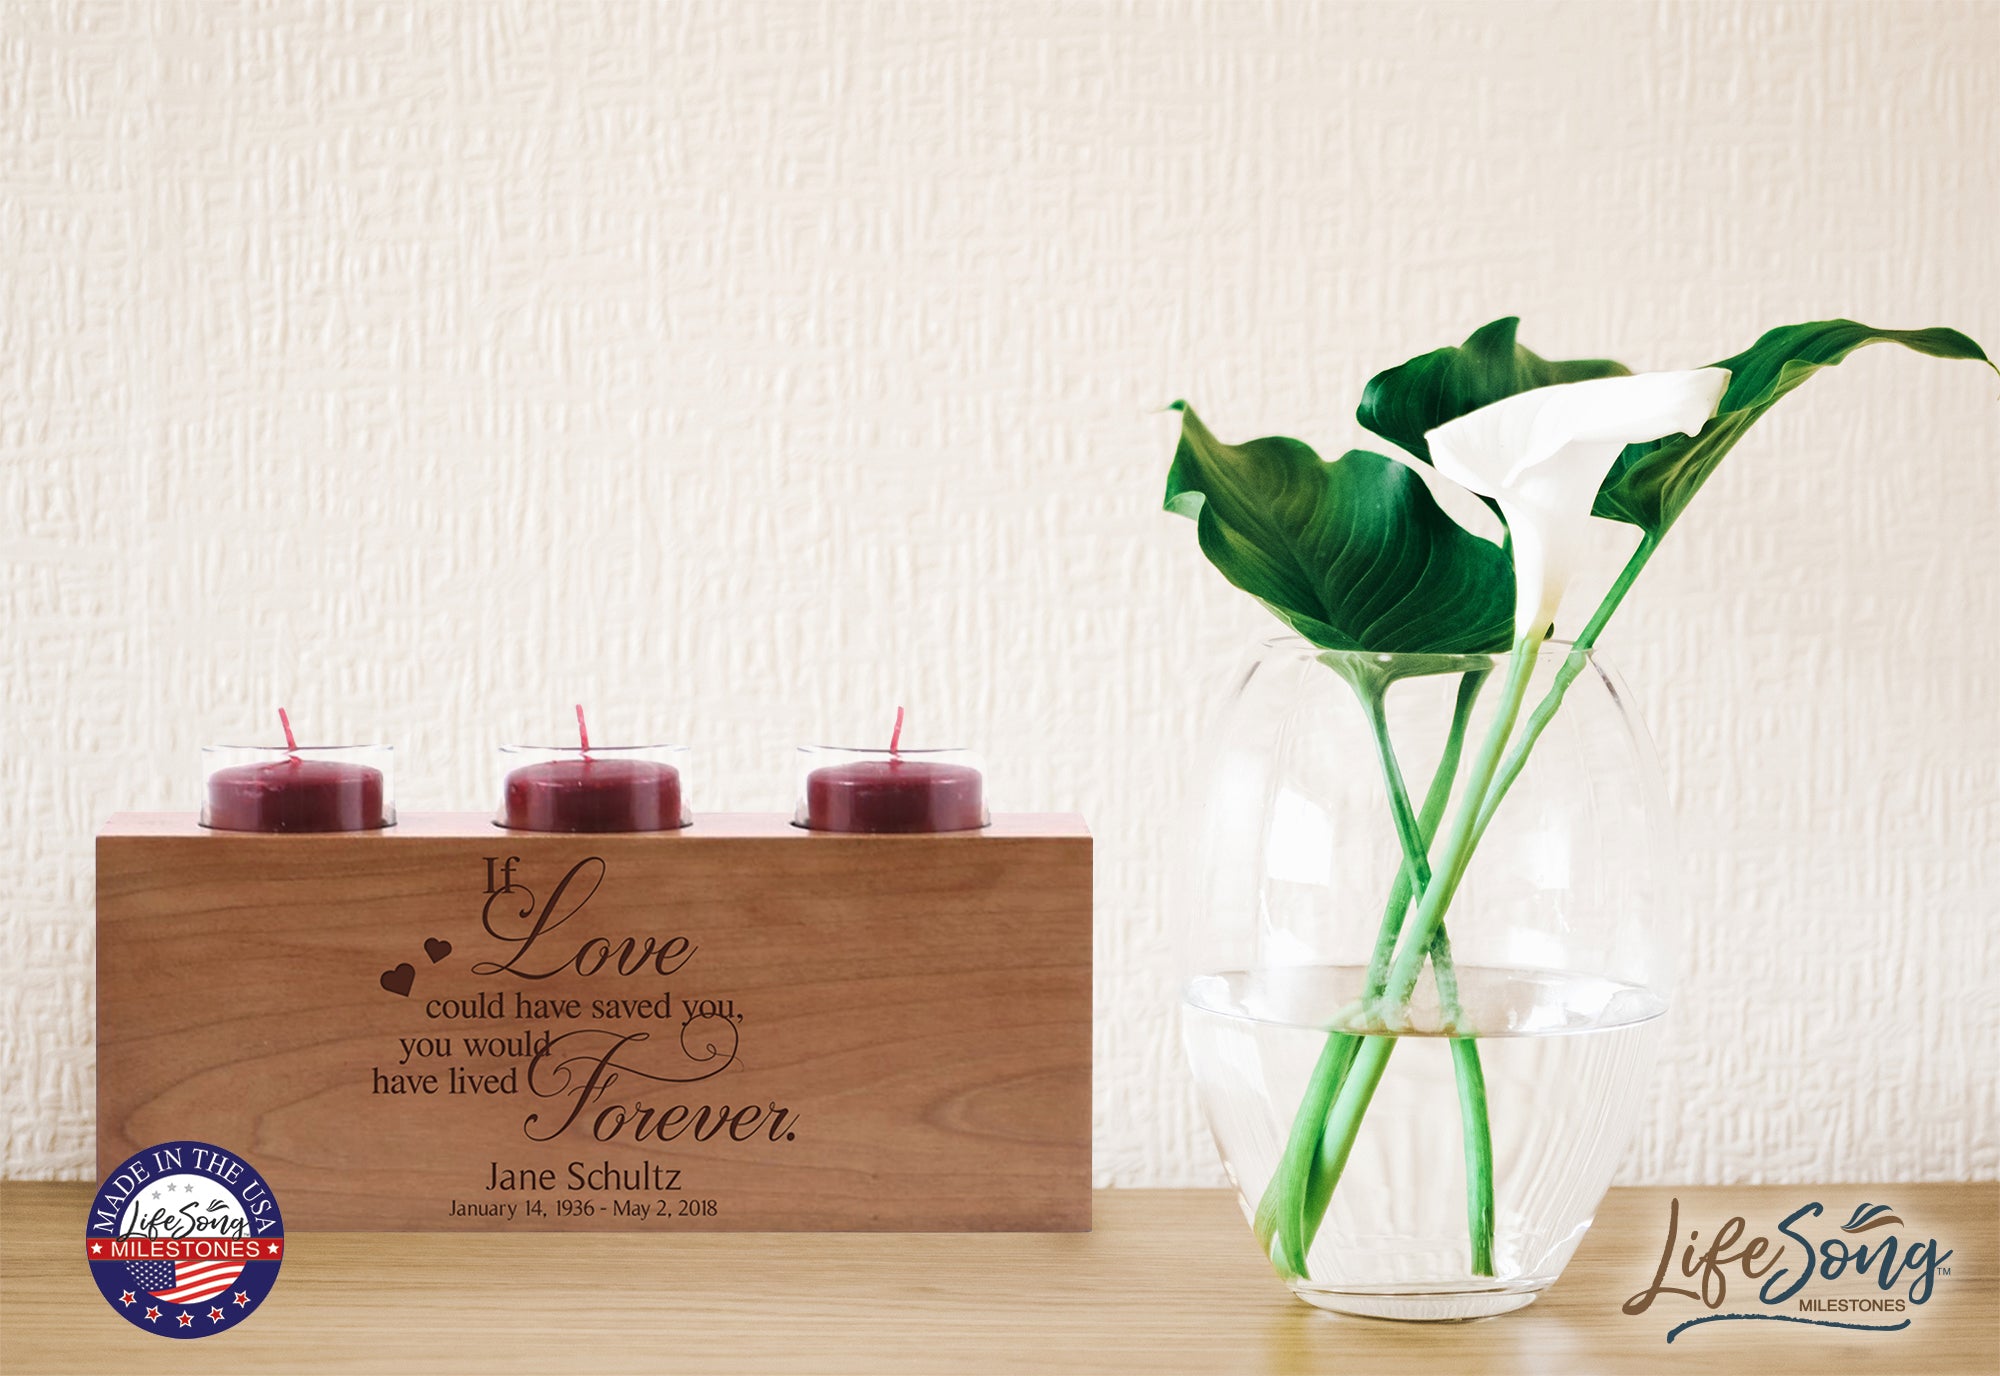 LifeSong Milestones Personalized Memorial 3 Votive Candle Holder If Love Could Have Saved You Bereavement Keepsake Candle Holder Loss of Loved One Sympathy Home Decor - 10” x 4” x 4”